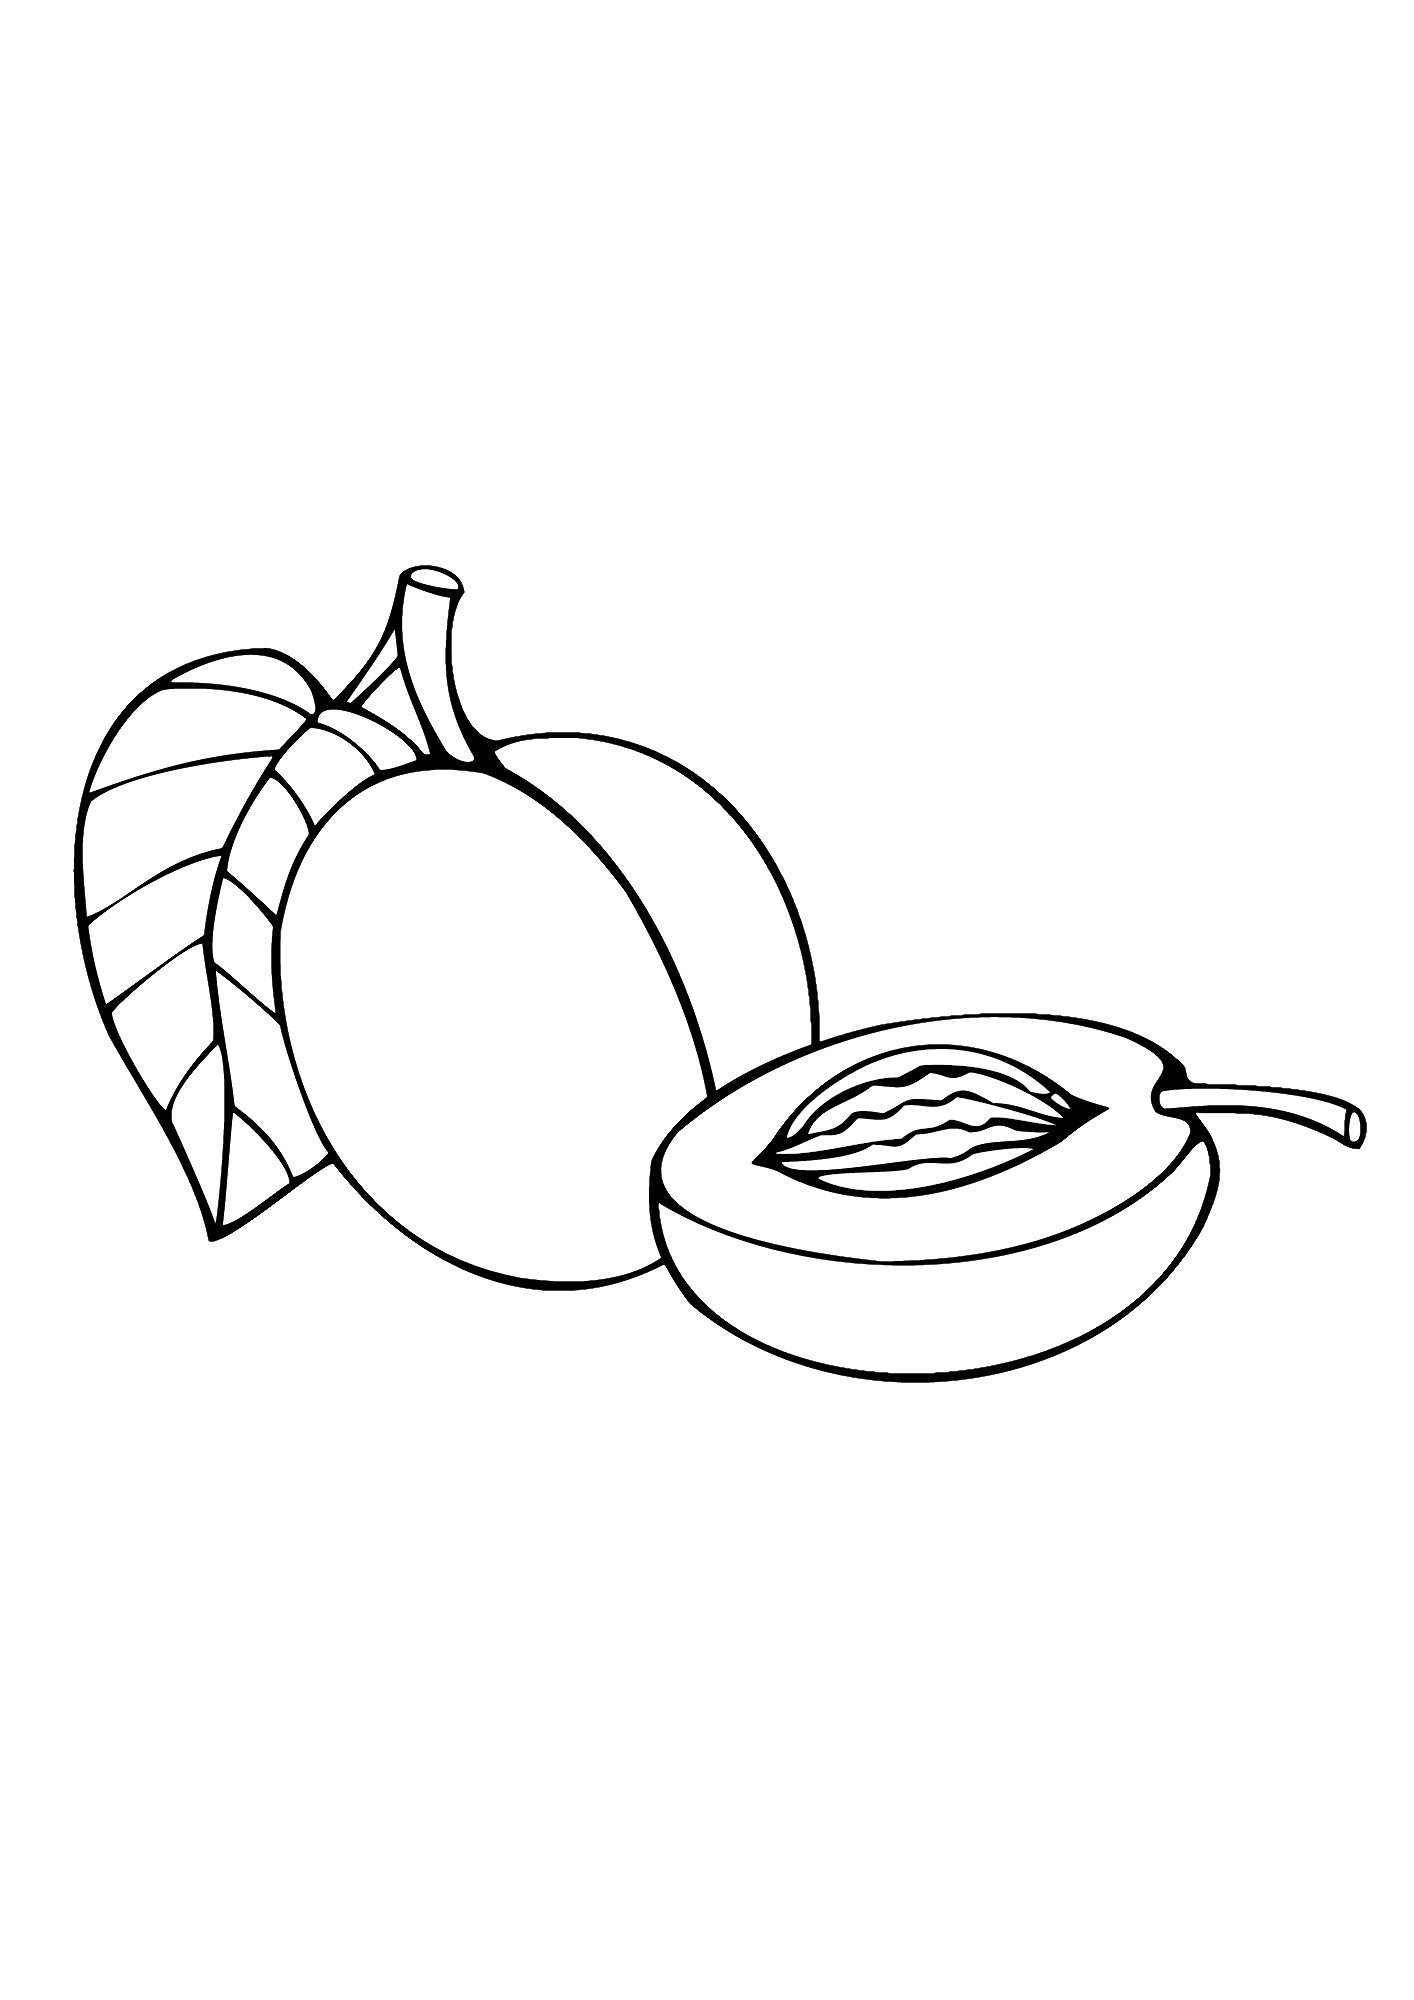 Apricot Picture Coloring Pages